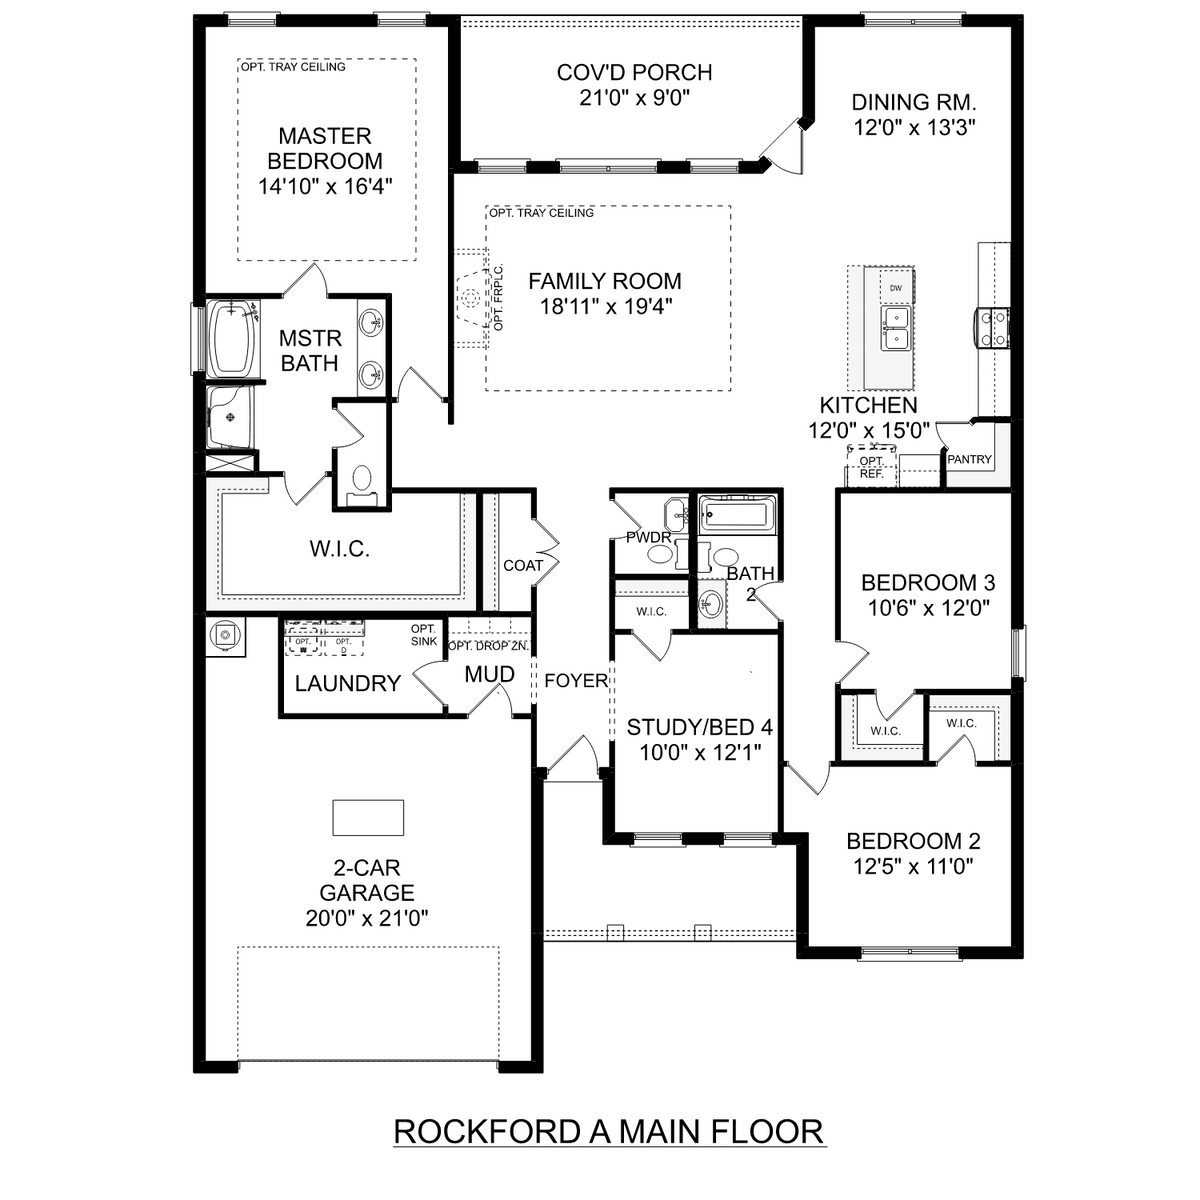 1 - The Rockford floor plan layout for 3102 Henry Road in Davidson Homes' River Road Estates community.